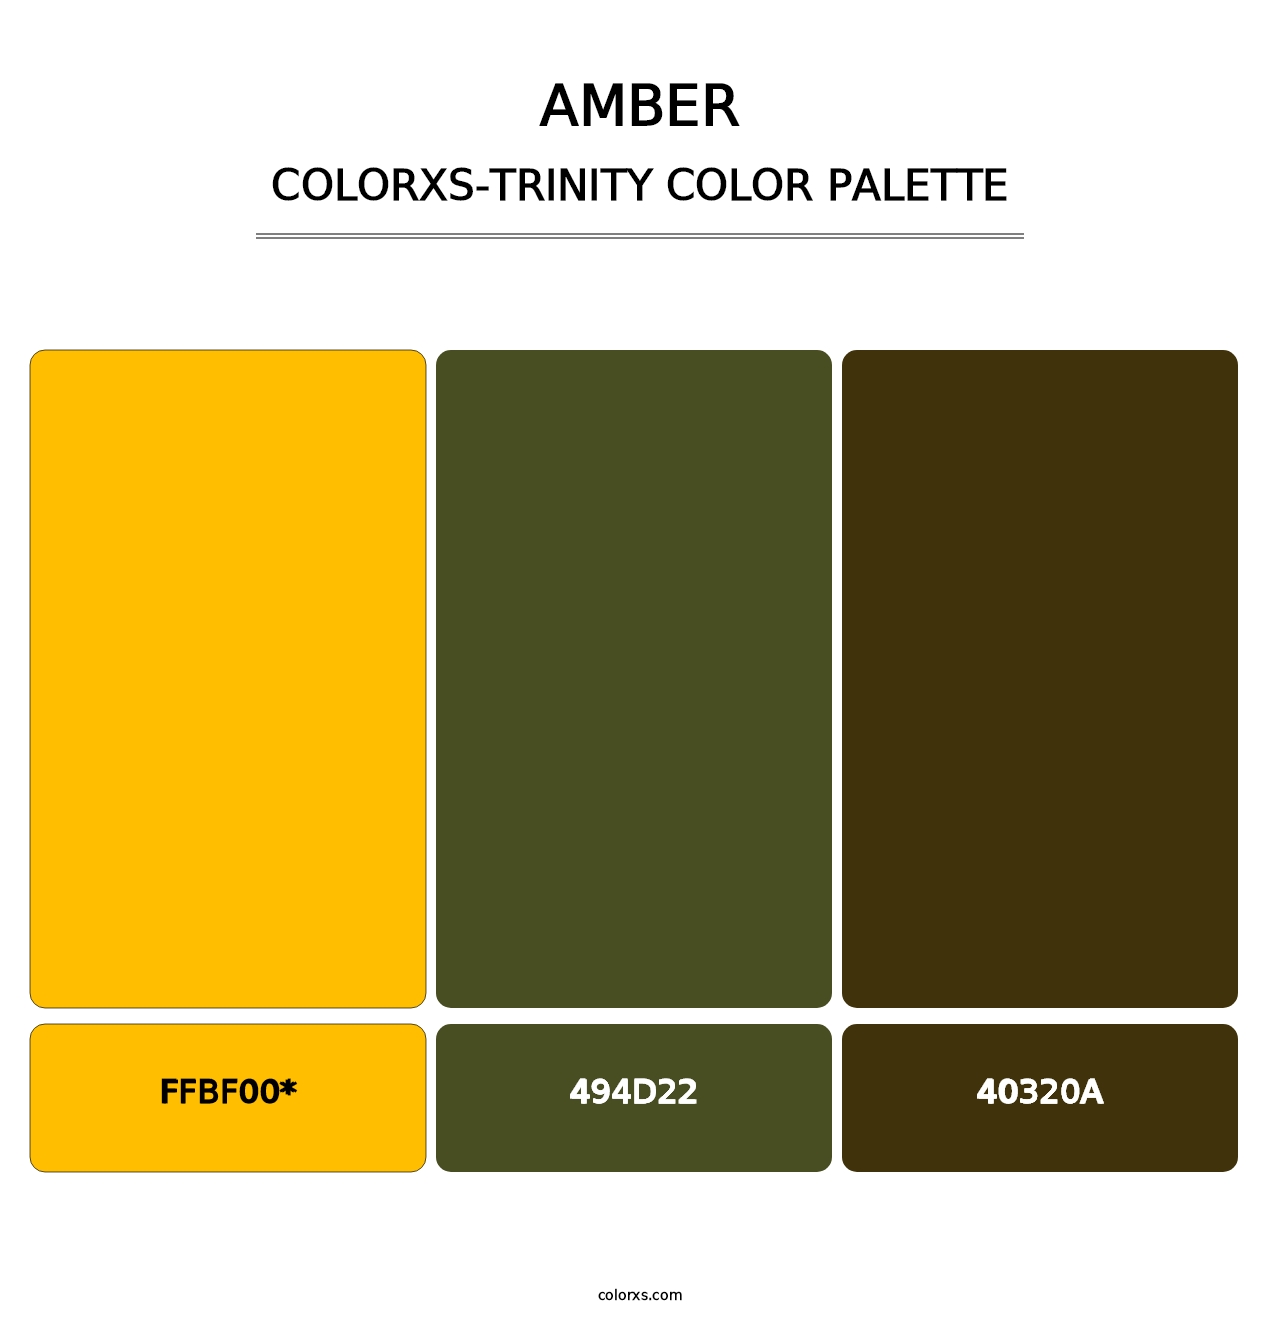 Amber - Colorxs Trinity Palette